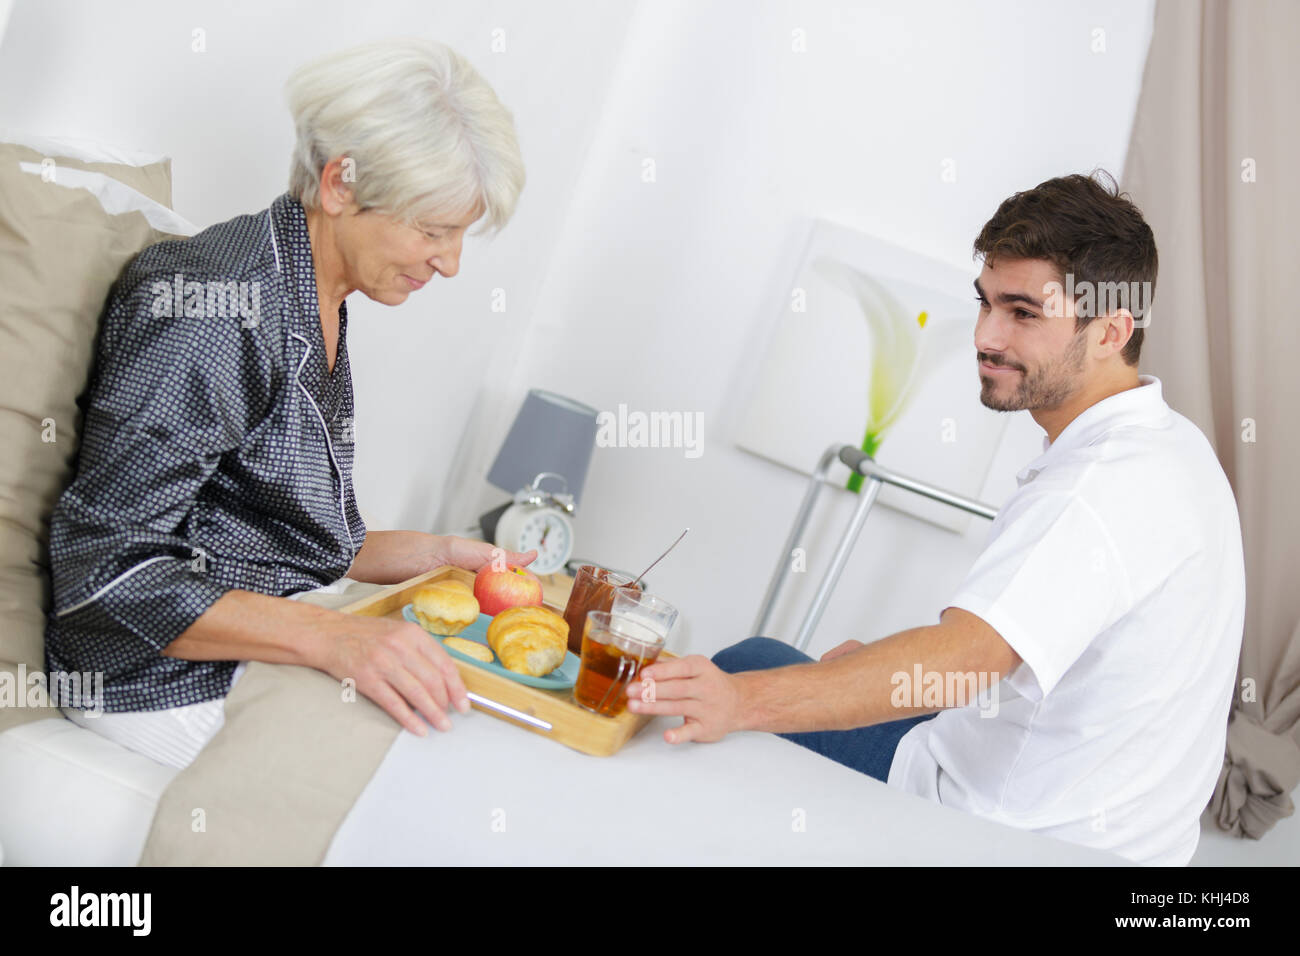 Young man serving breakfast in bed to elderly lady Stock Photo